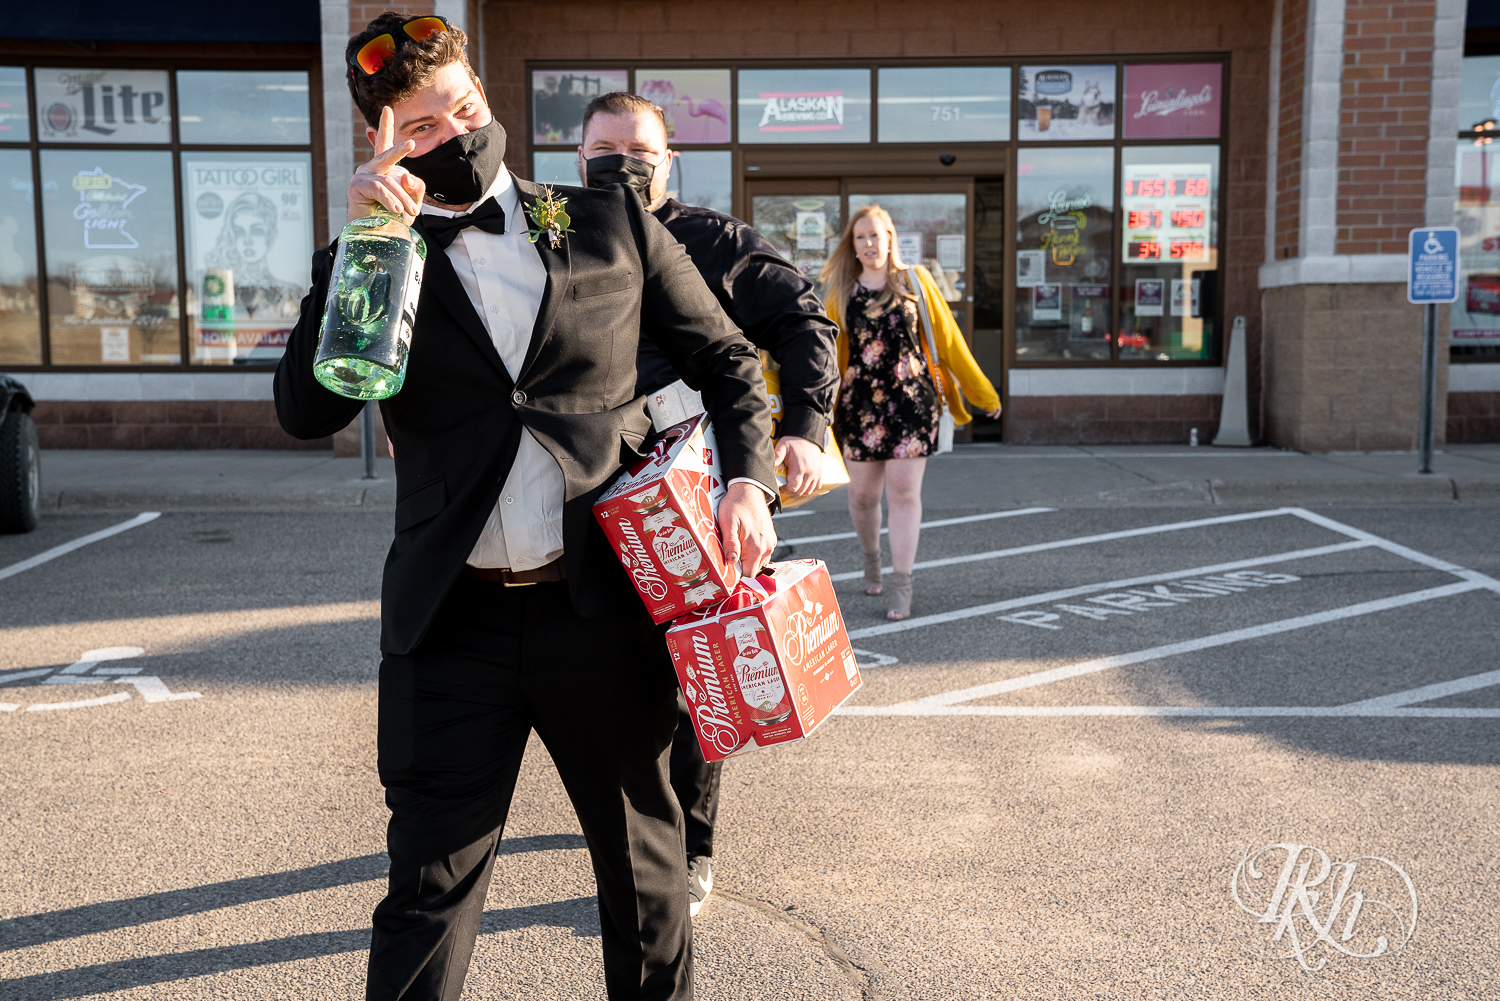 Wedding party in black suits and dresses carry bottles of alcohol out of liquor store.